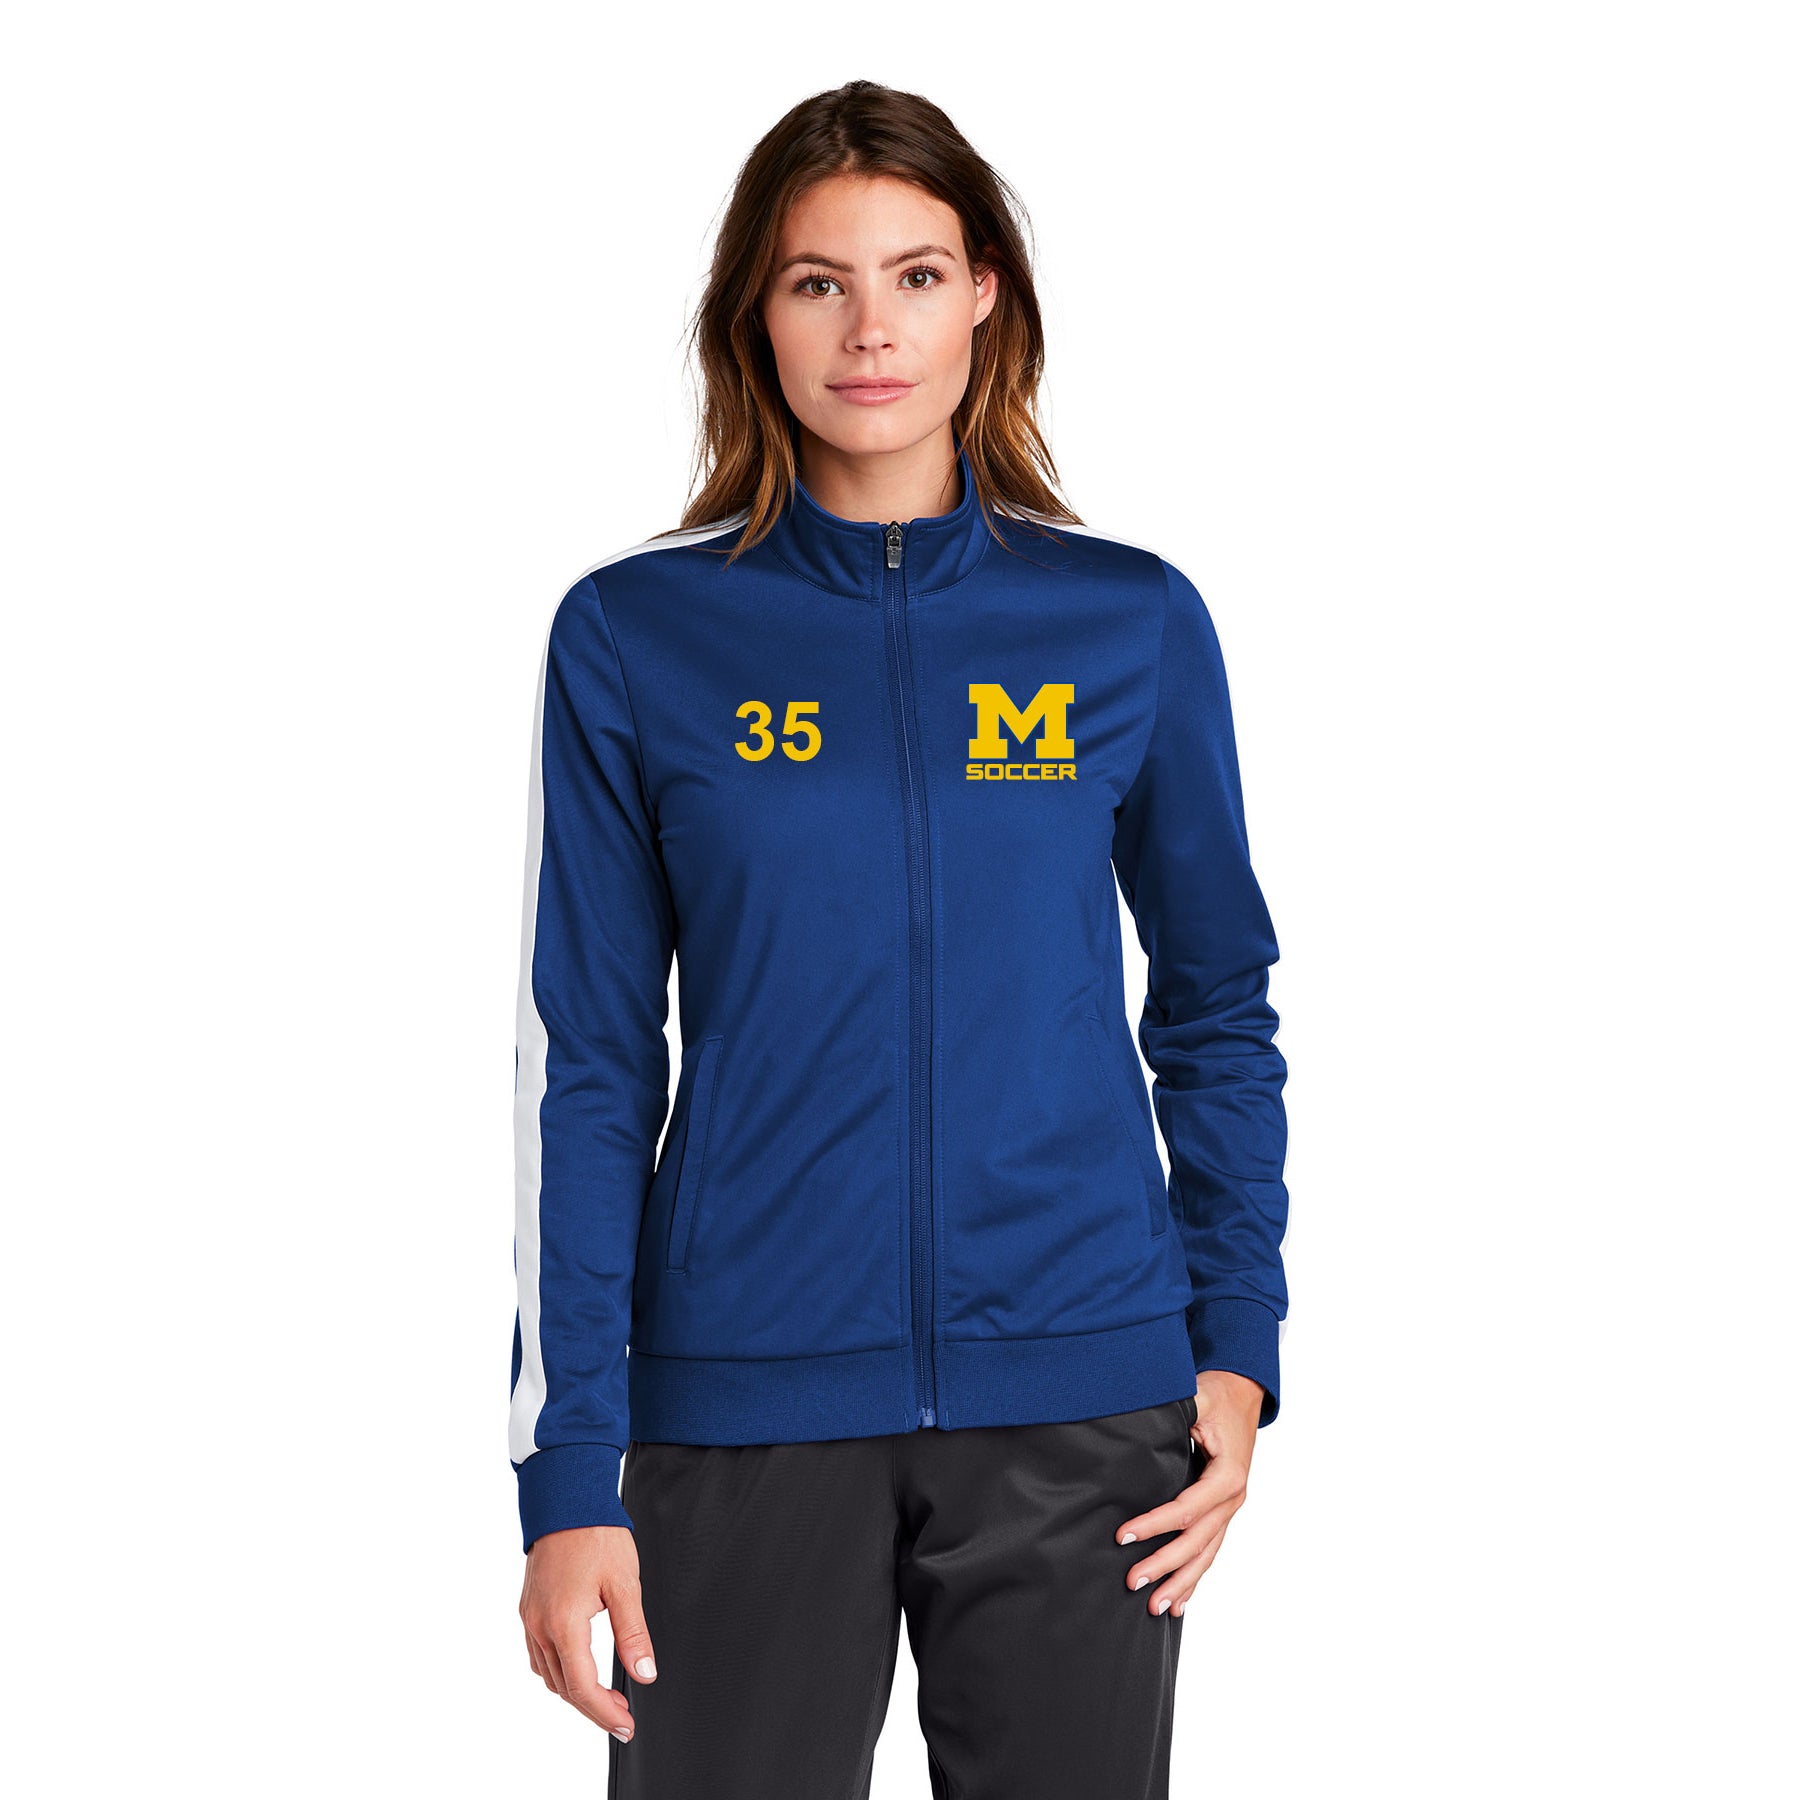 MIRA MESA SOCCER WOMEN'S PLAYER TRACK JACKET - EMBROIDERED